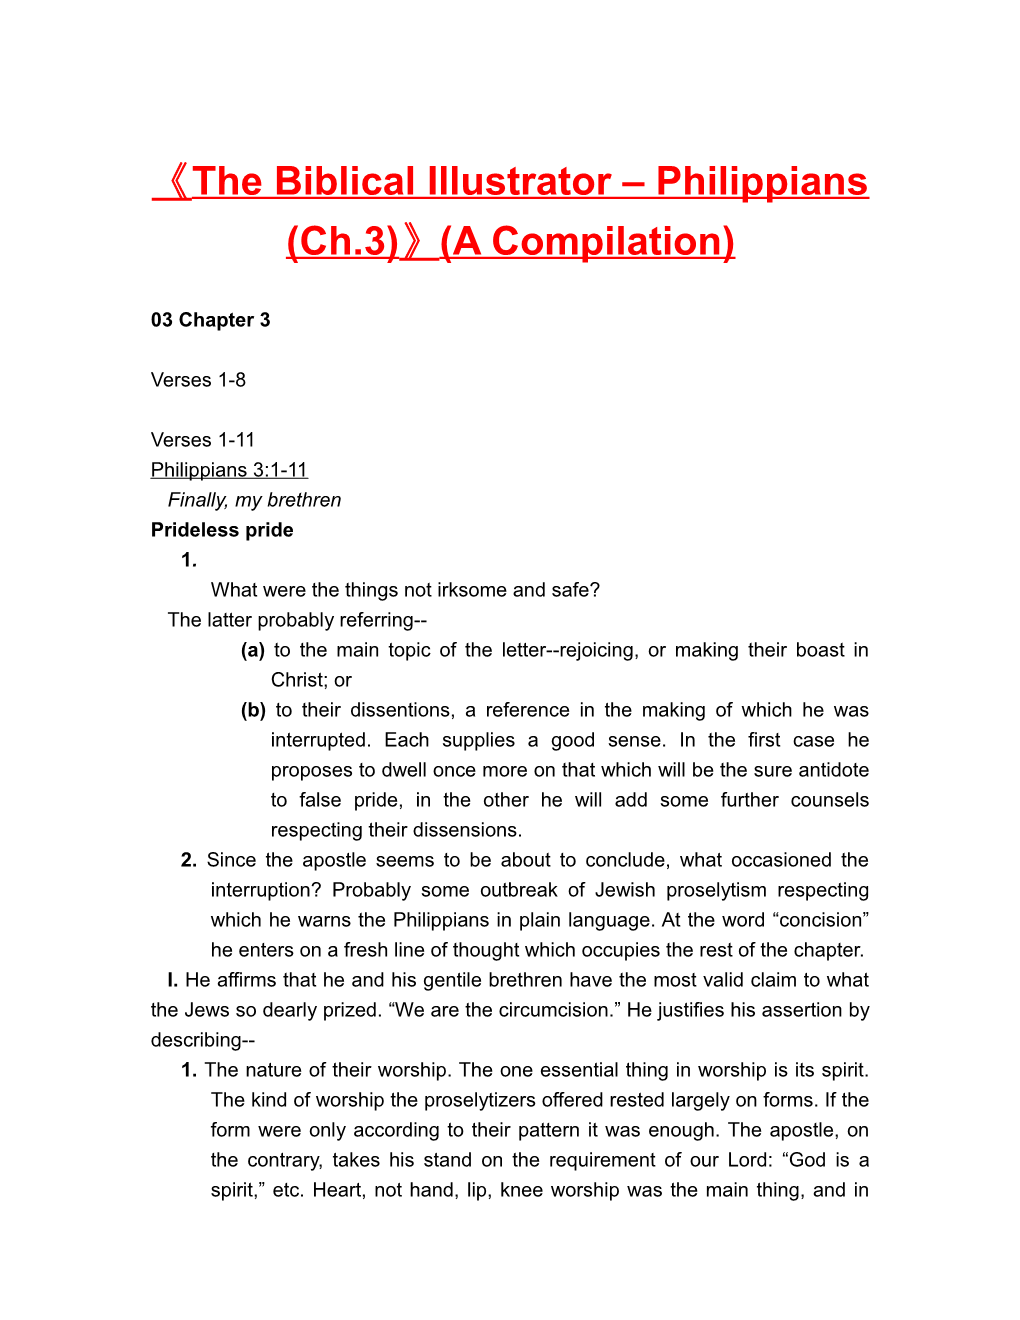 The Biblical Illustrator Philippians (Ch.3) (A Compilation)